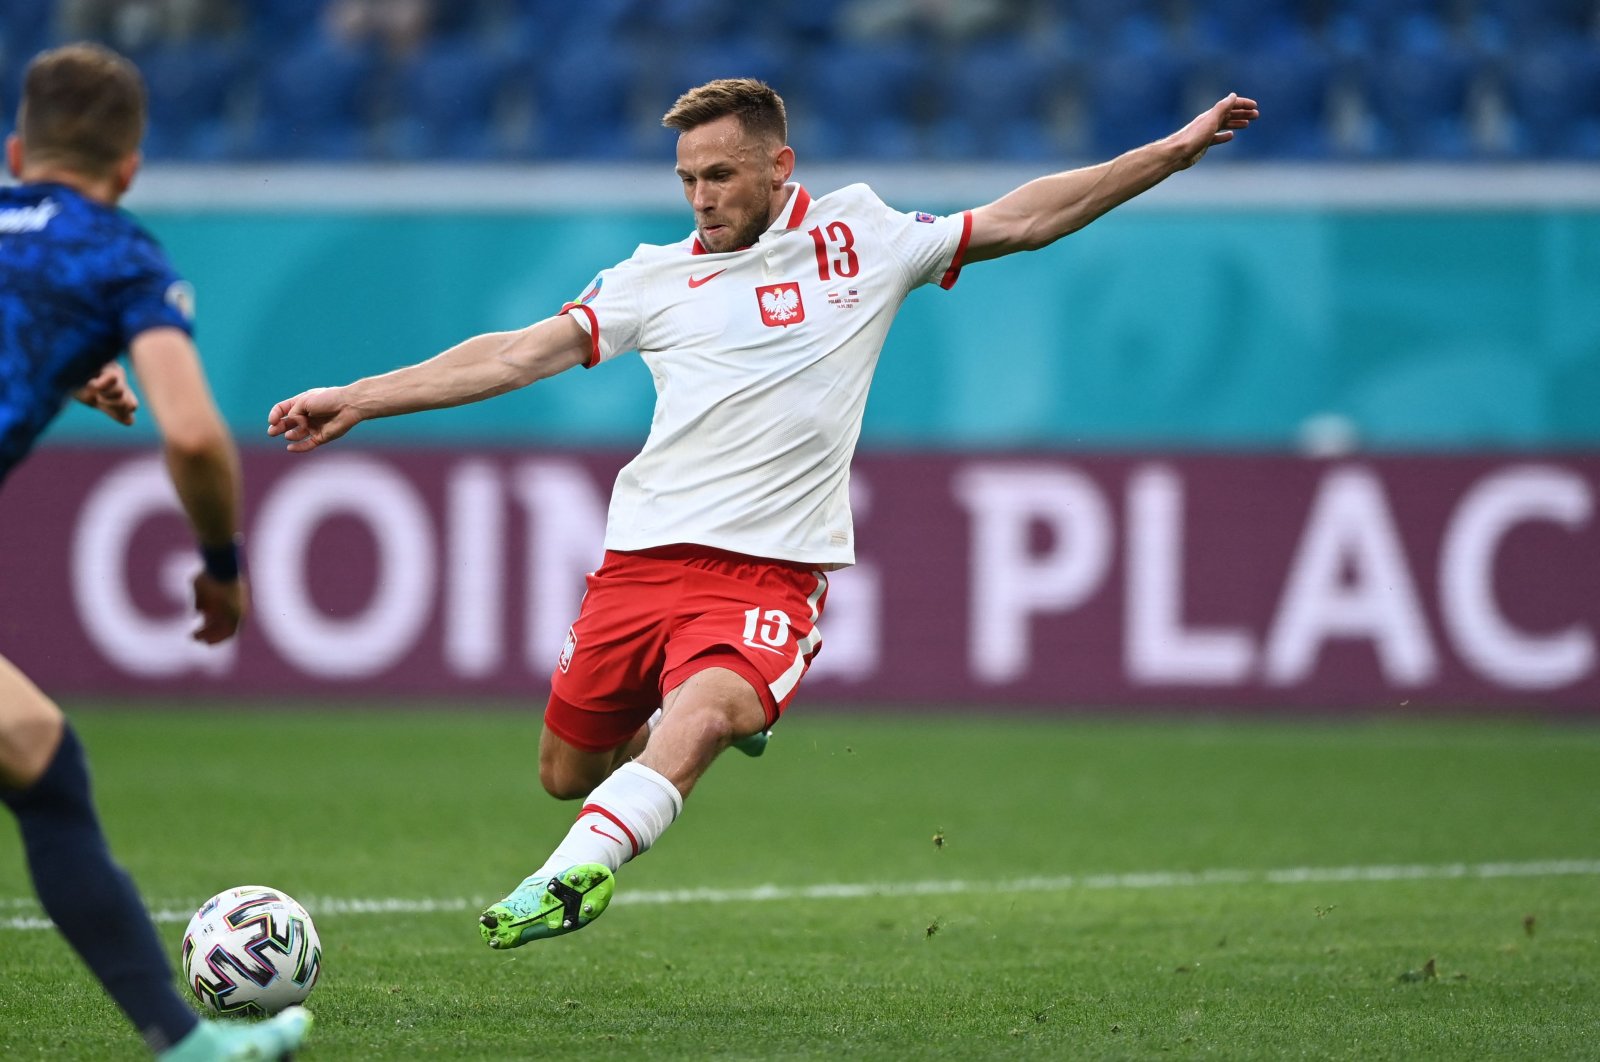 Poland&#039;s defender Maciej Rybus in action during a UEFA Euro 2020 match against Slovakia, St. Petersburg, Russia, June 14, 2021. (AFP Photo)